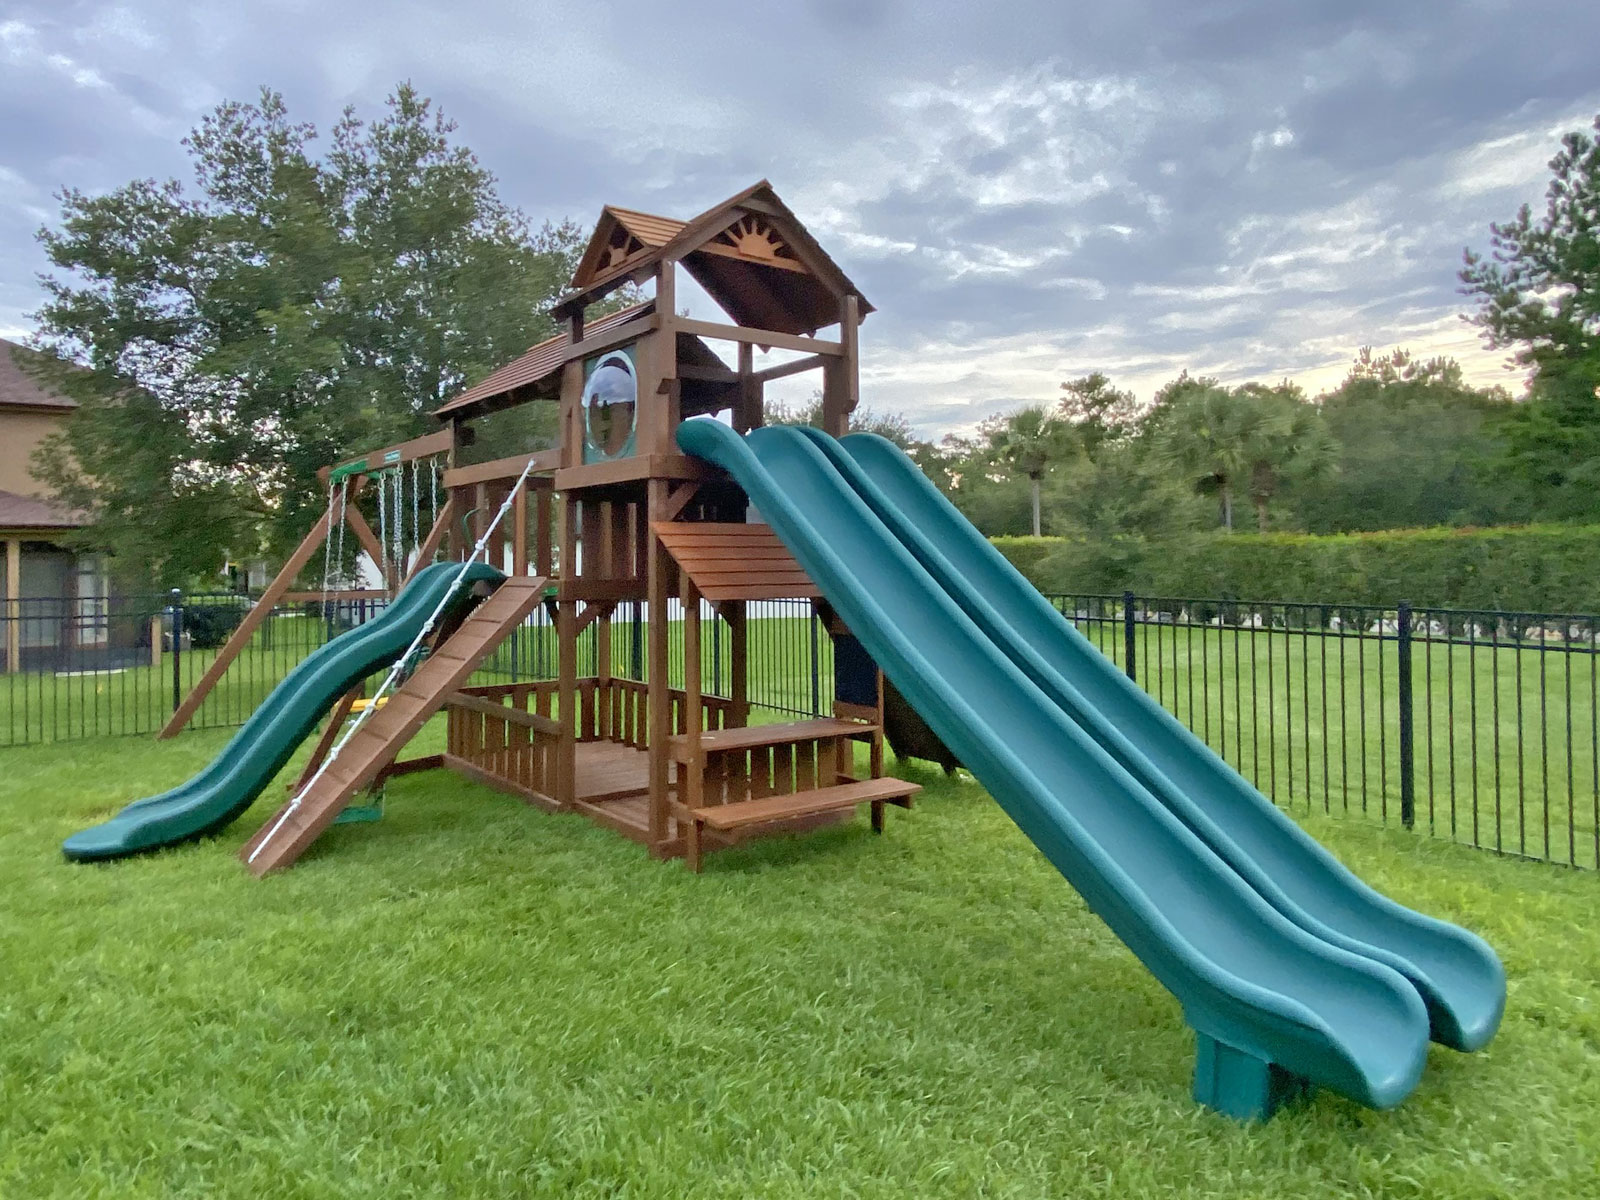 Photo of a Creative Playthings swing set in a customer's yard.